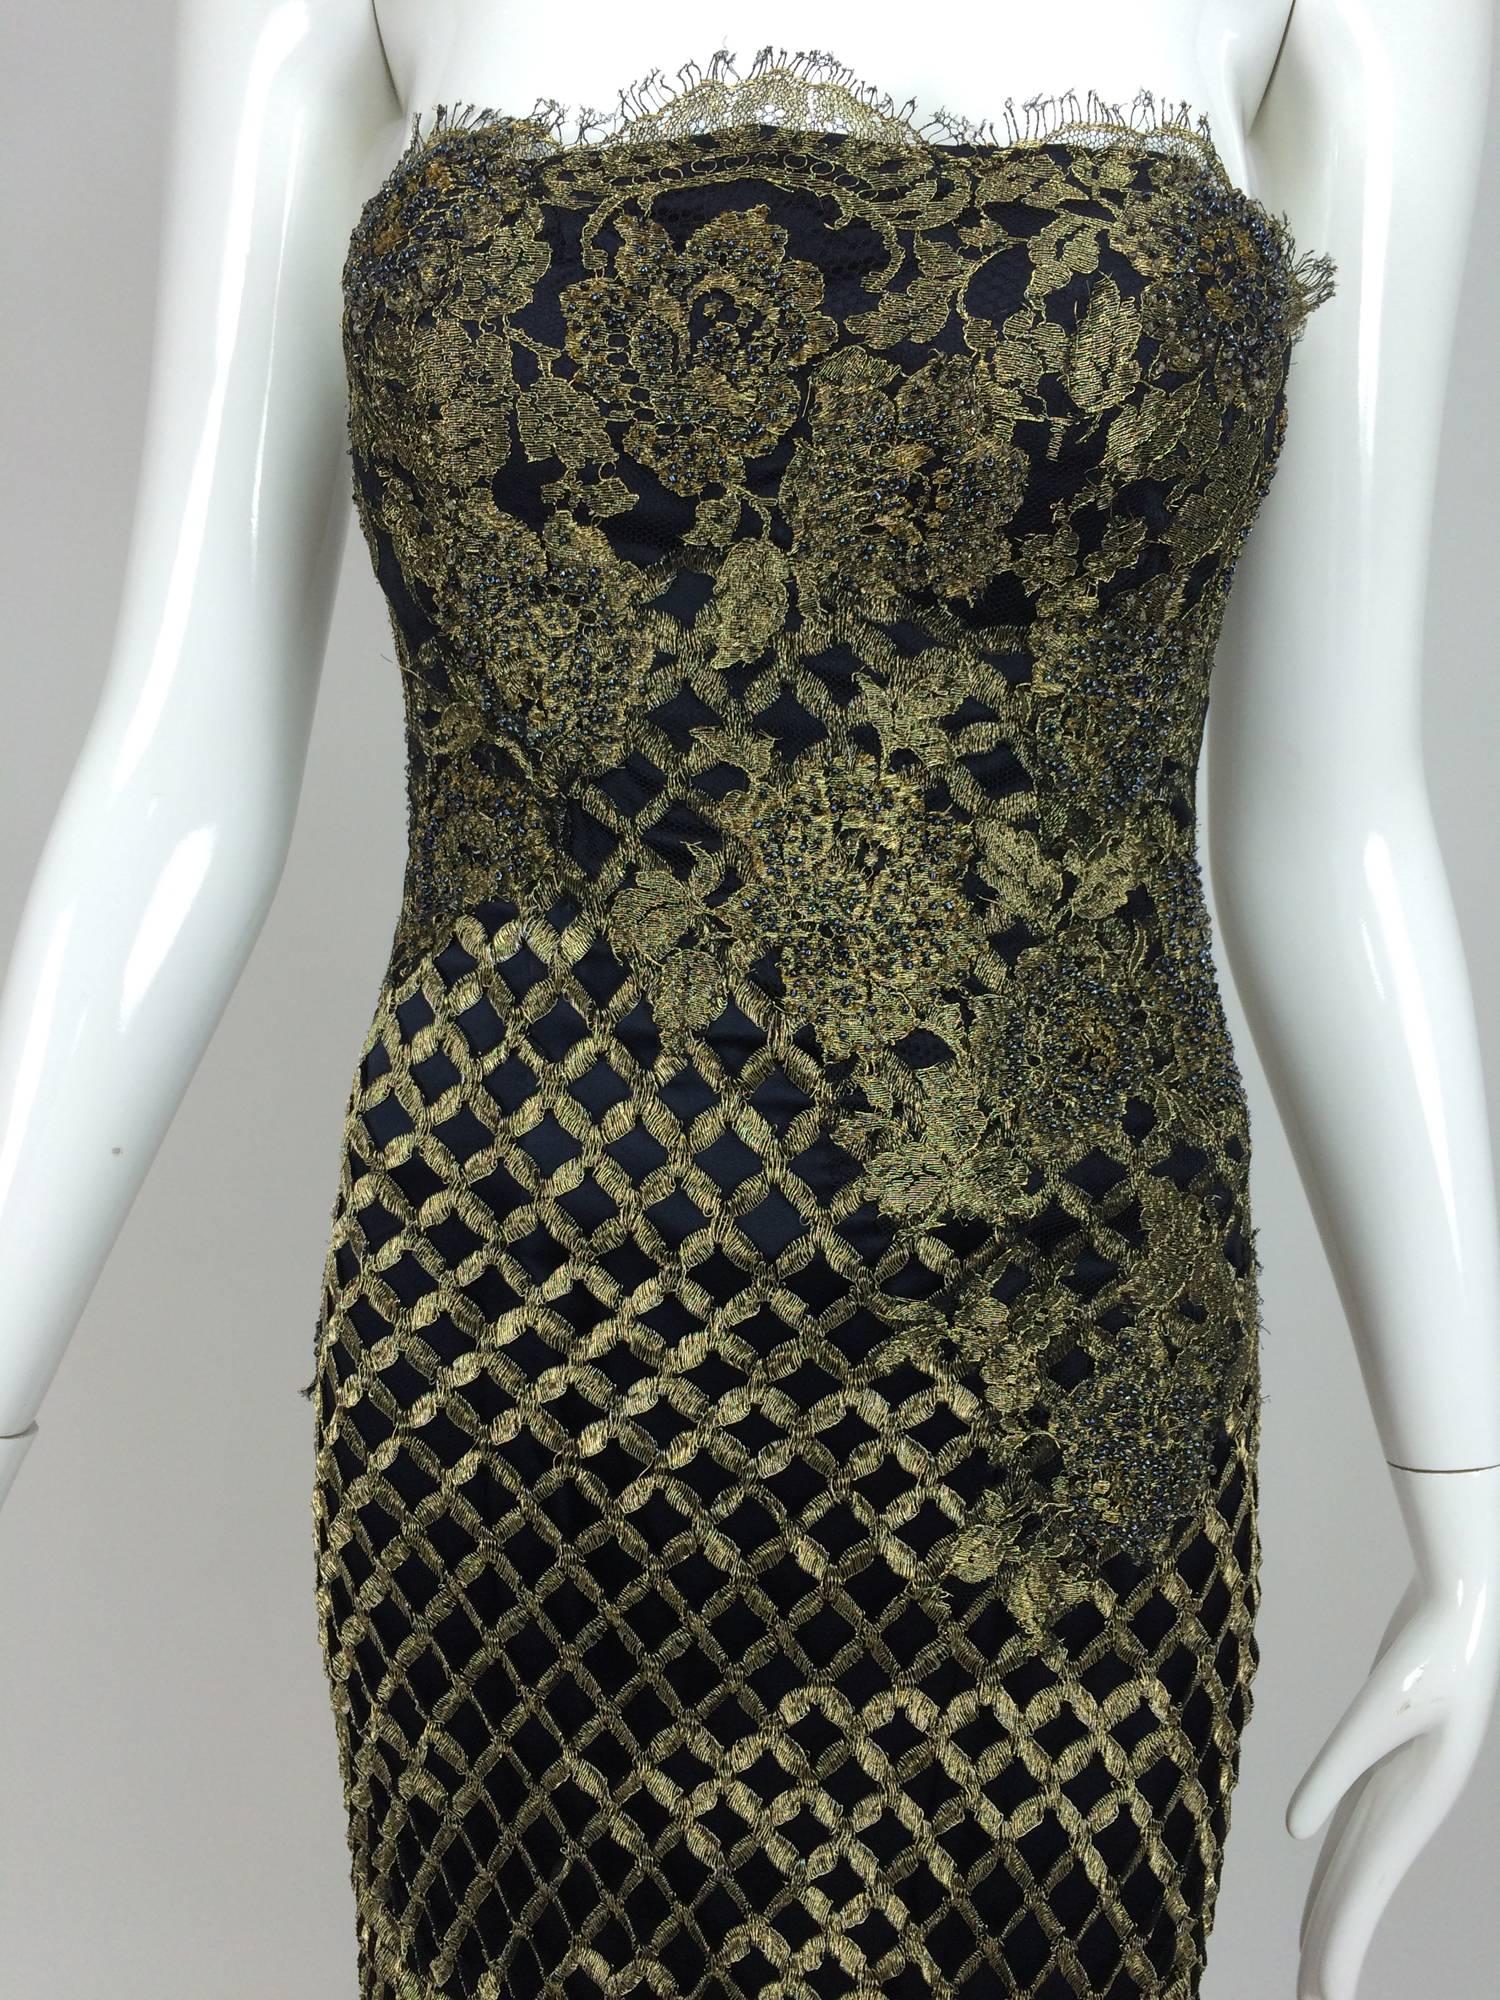 Vintage Dolce & Gabbana strapless metallic gold evening gown 1990s...Gold metallic braid is woven in a lattice pattern, done in such a way, that it catches the light in patterns as you can see in the photos...The dress has appliques of bronze beaded